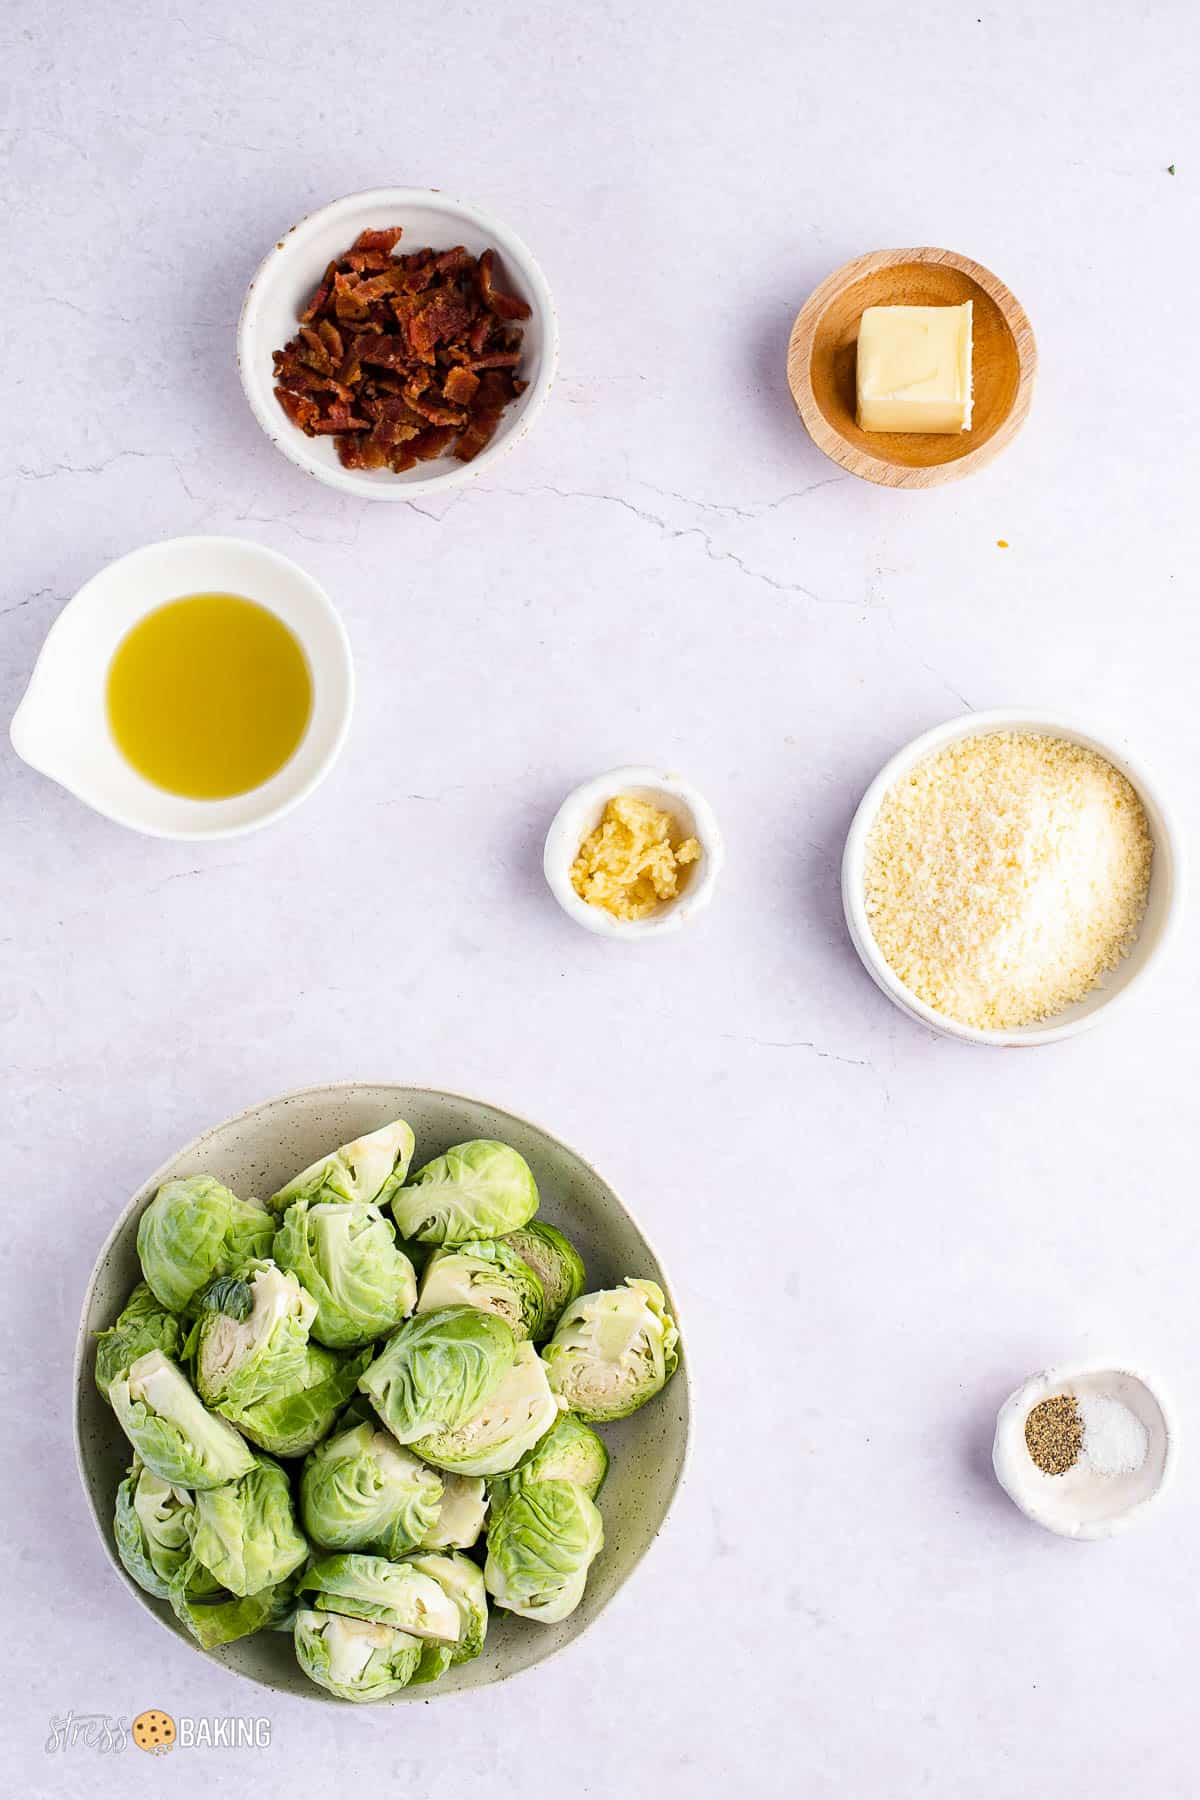 Ingredients in bowls for pan fried brussels sprouts with bacon